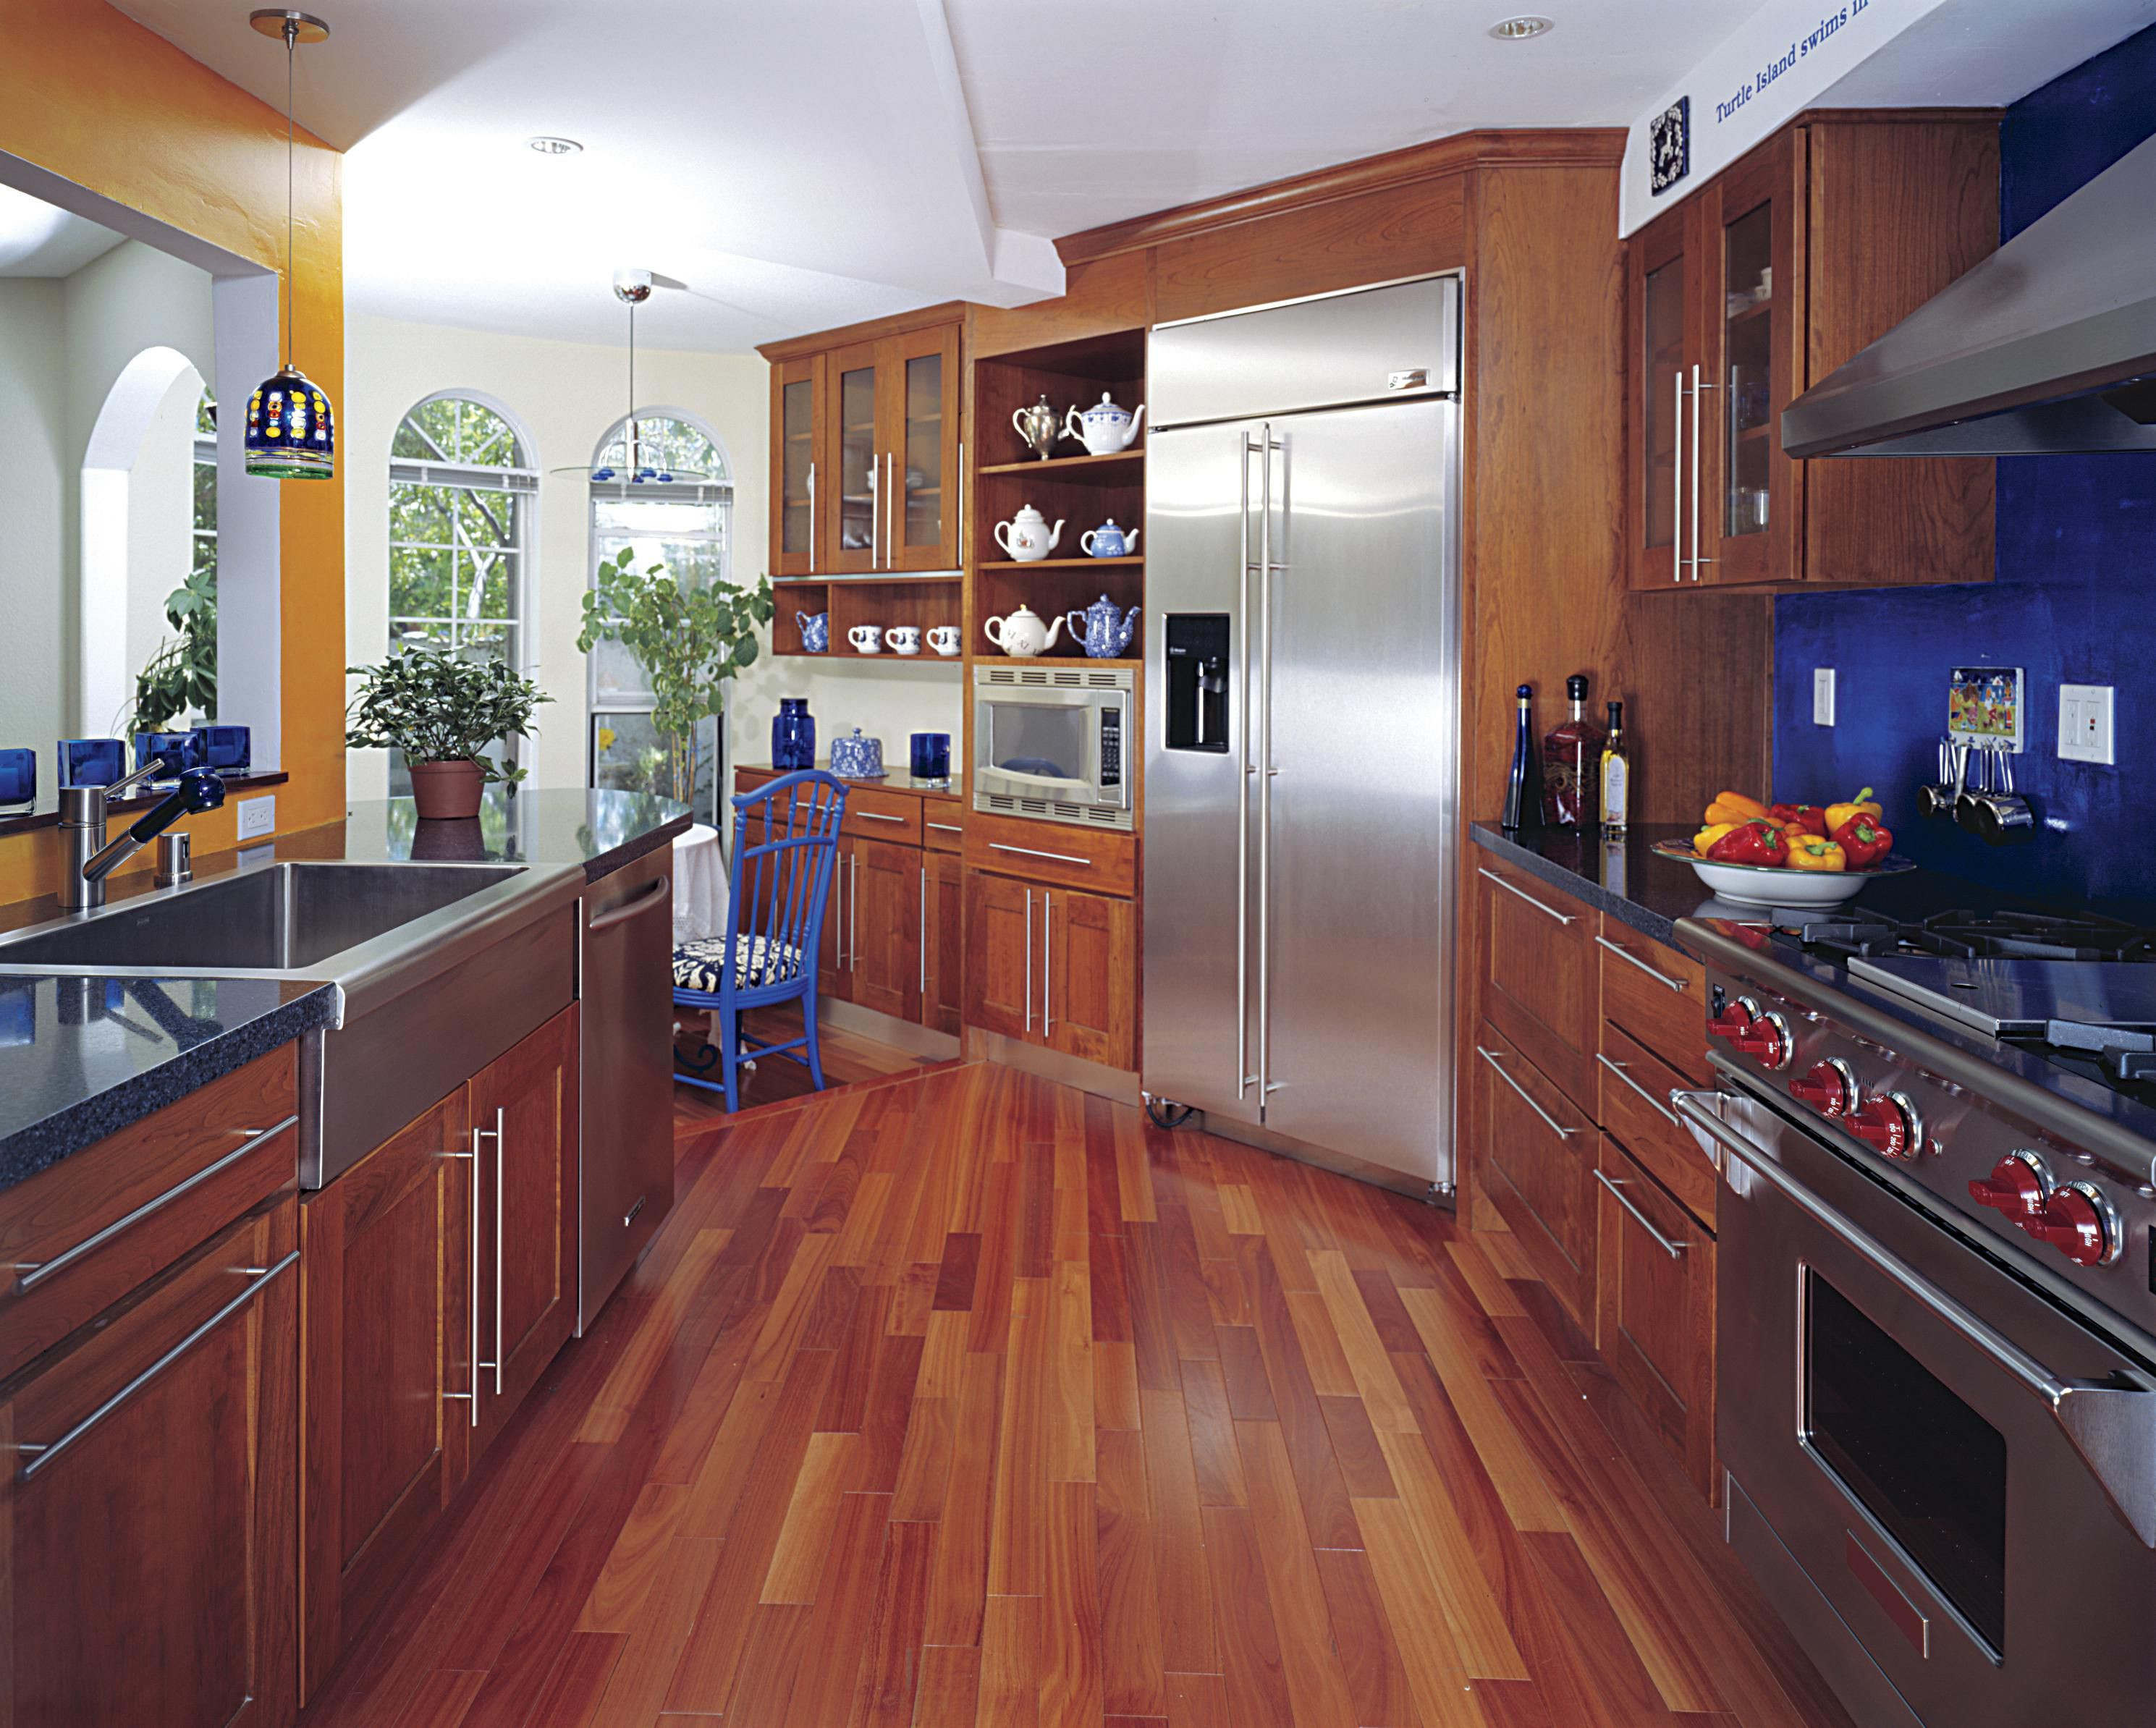 15 Ideal Hardwood Flooring Kalispell 2024 free download hardwood flooring kalispell of hardwood floor in a kitchen is this allowed pertaining to 186828472 56a49f3a5f9b58b7d0d7e142